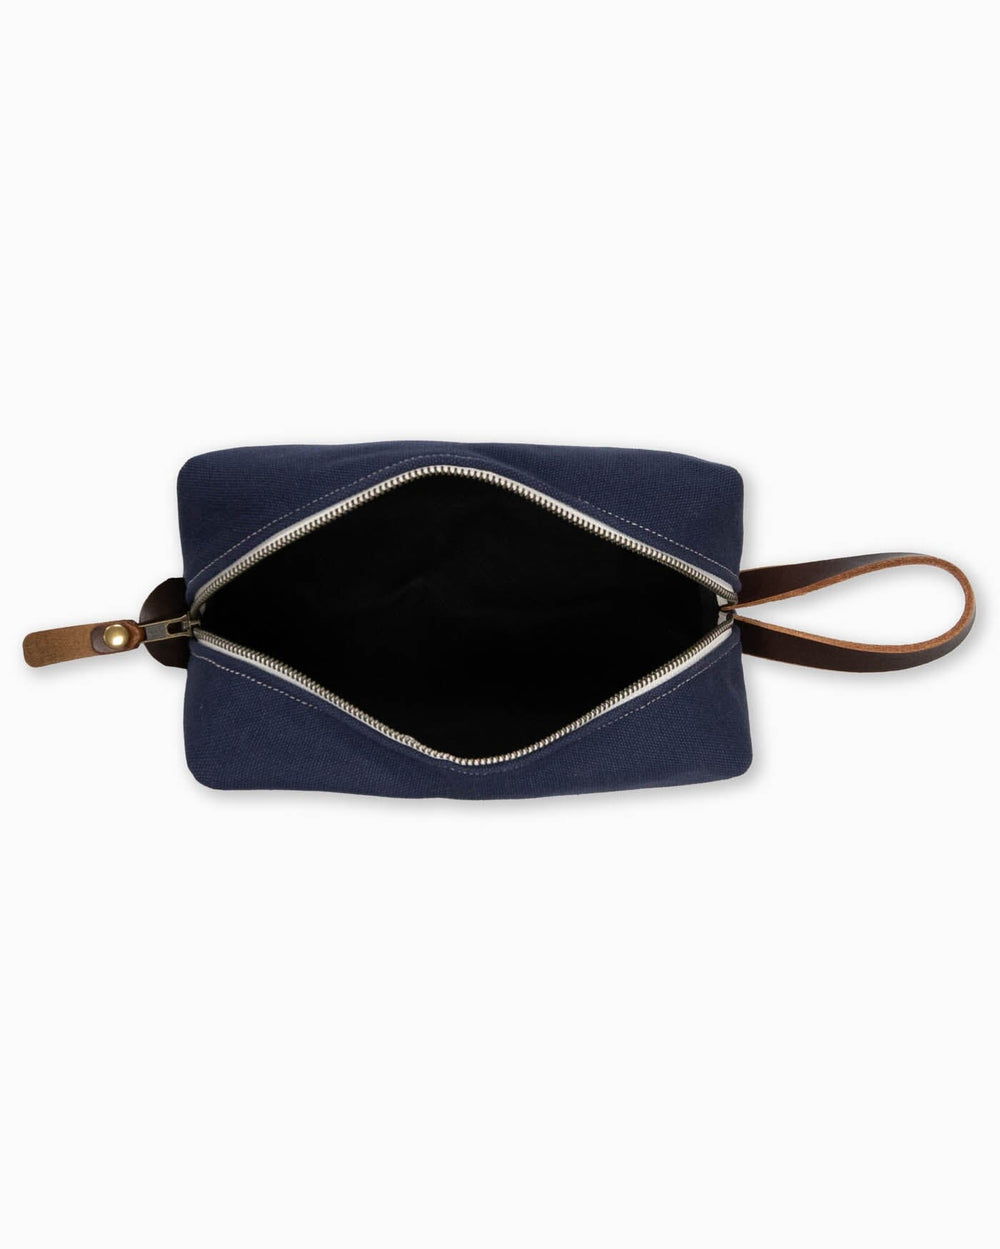 The detail view of the Southern Tide Navy Dopp Kit by Southern Tide - Navy